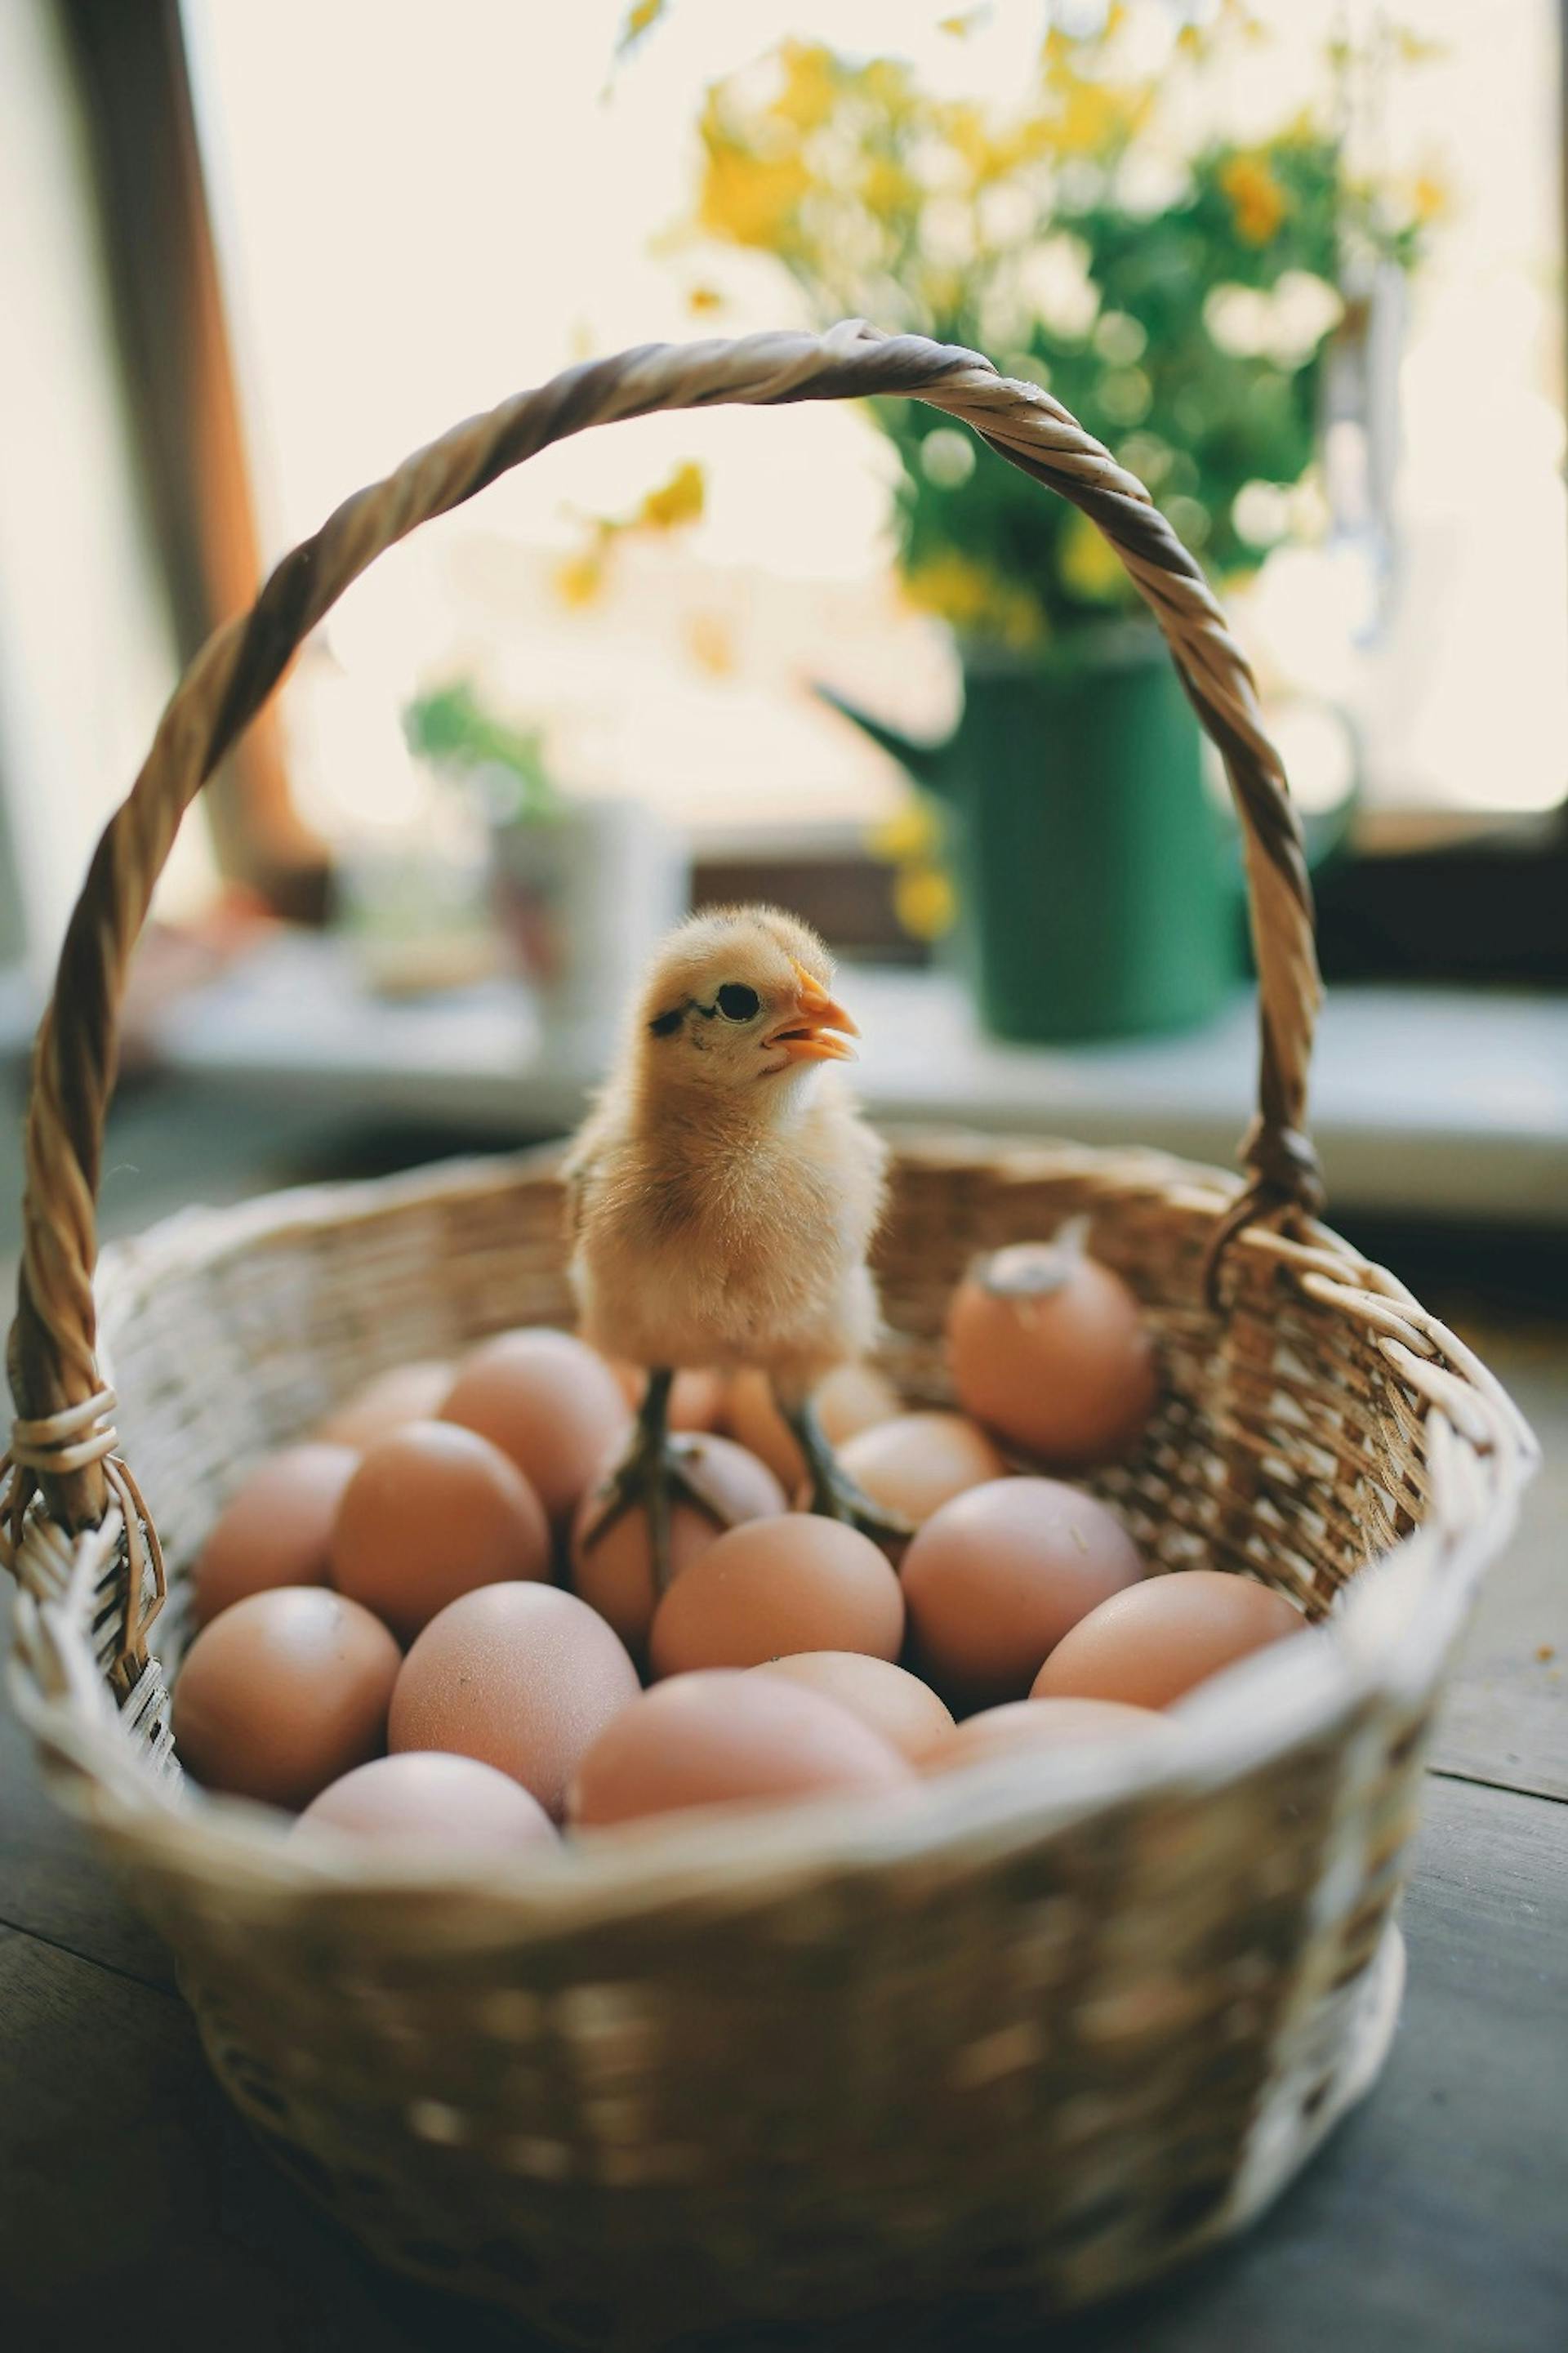 Output vs Outcome. A petite chick sitting in a basket with eggs.